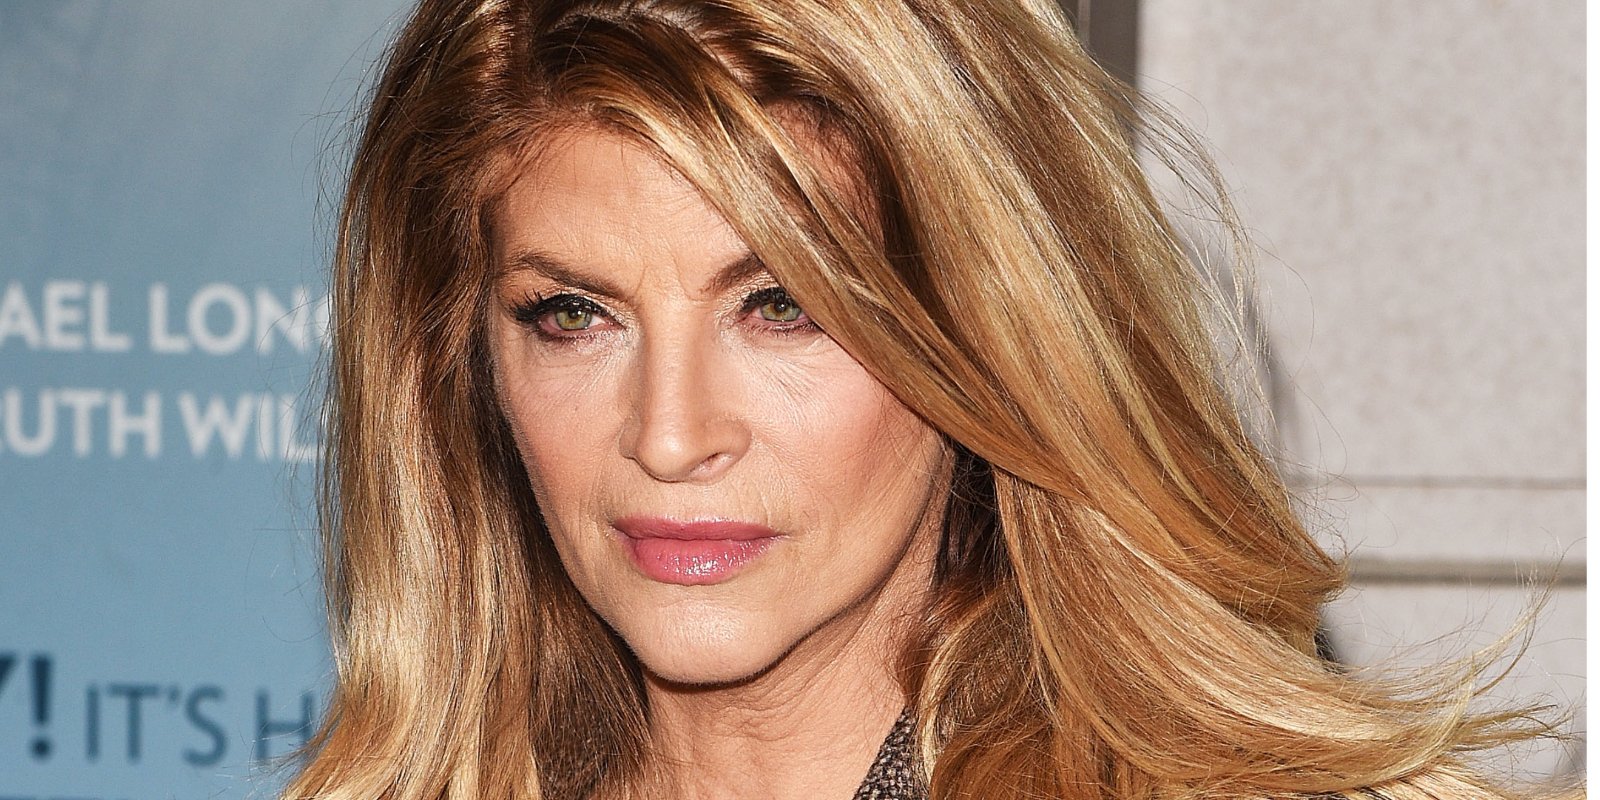 Kirstie Alley attends "Constellations" Broadway opening night at Samuel J. Friedman Theatre on January 13, 2015 in New York City.